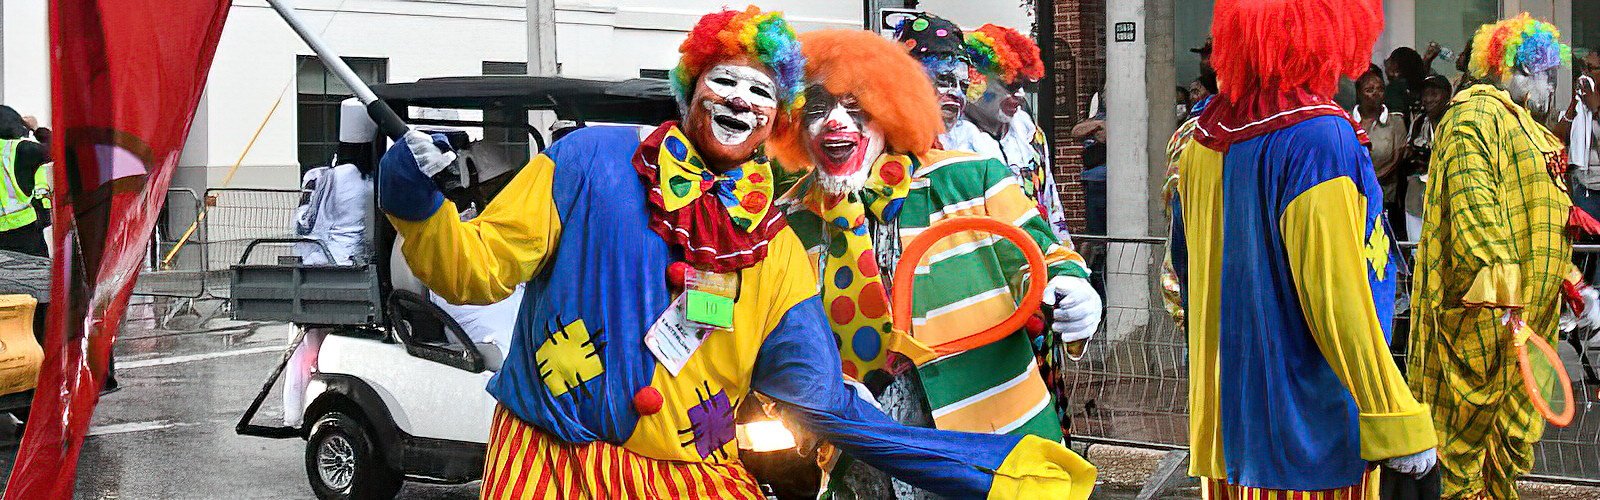 Clowns play an important part in AEAONMS festivities and philanthropic activities, spreading joy and providing entertainment with a brotherly spirit.